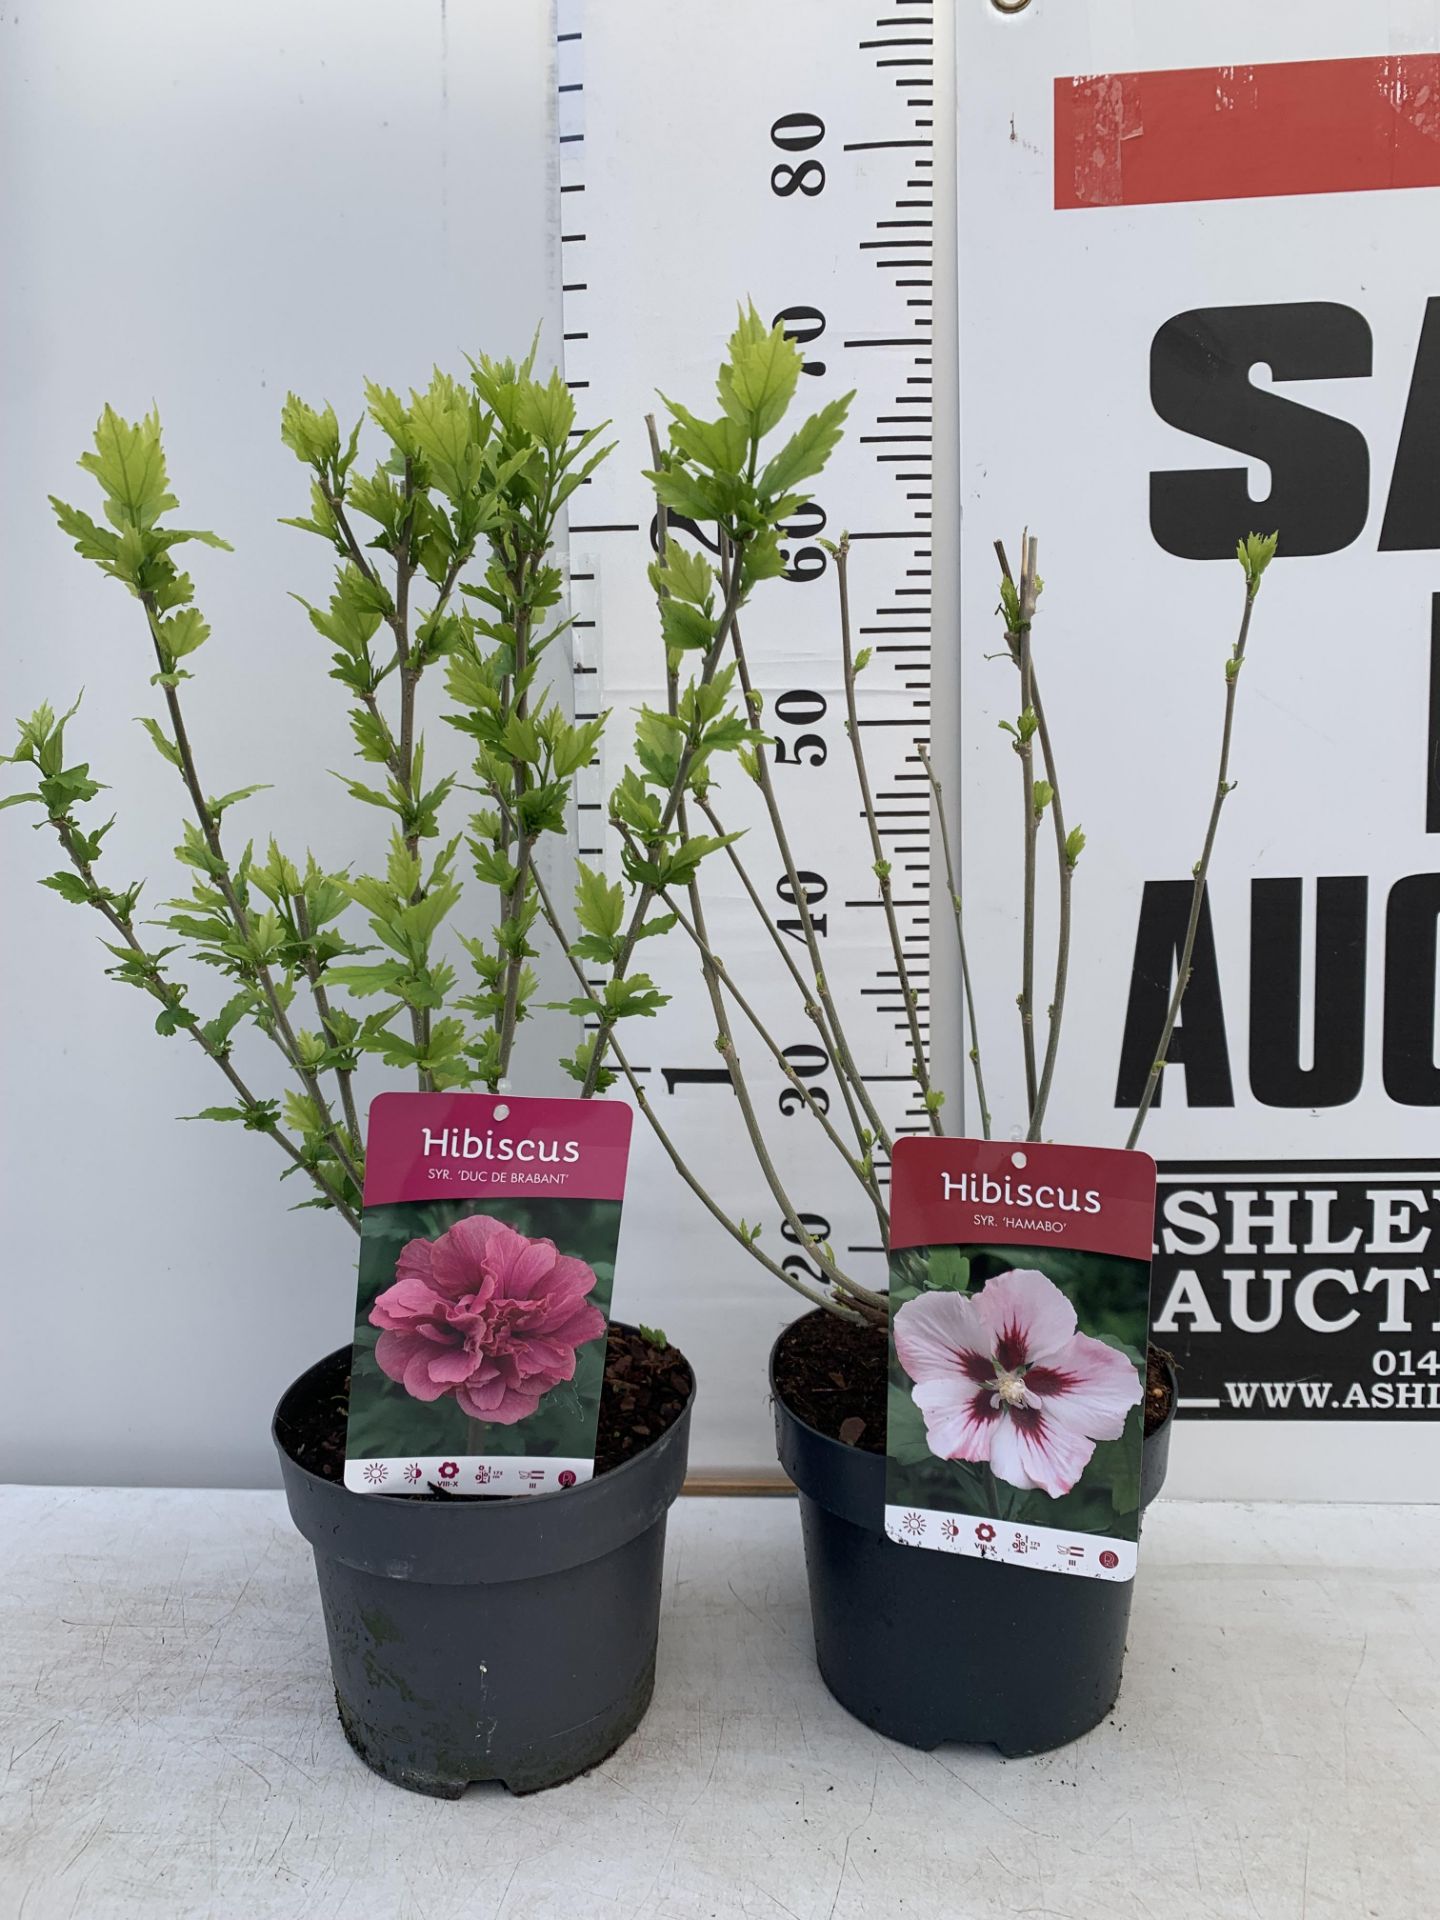 TWO HIBISCUS SYRIACUS DUC DE BRABANT AND HAMABO IN 3 LTR POTS 60CM TALL PLUS VAT TO BE SOLD FOR